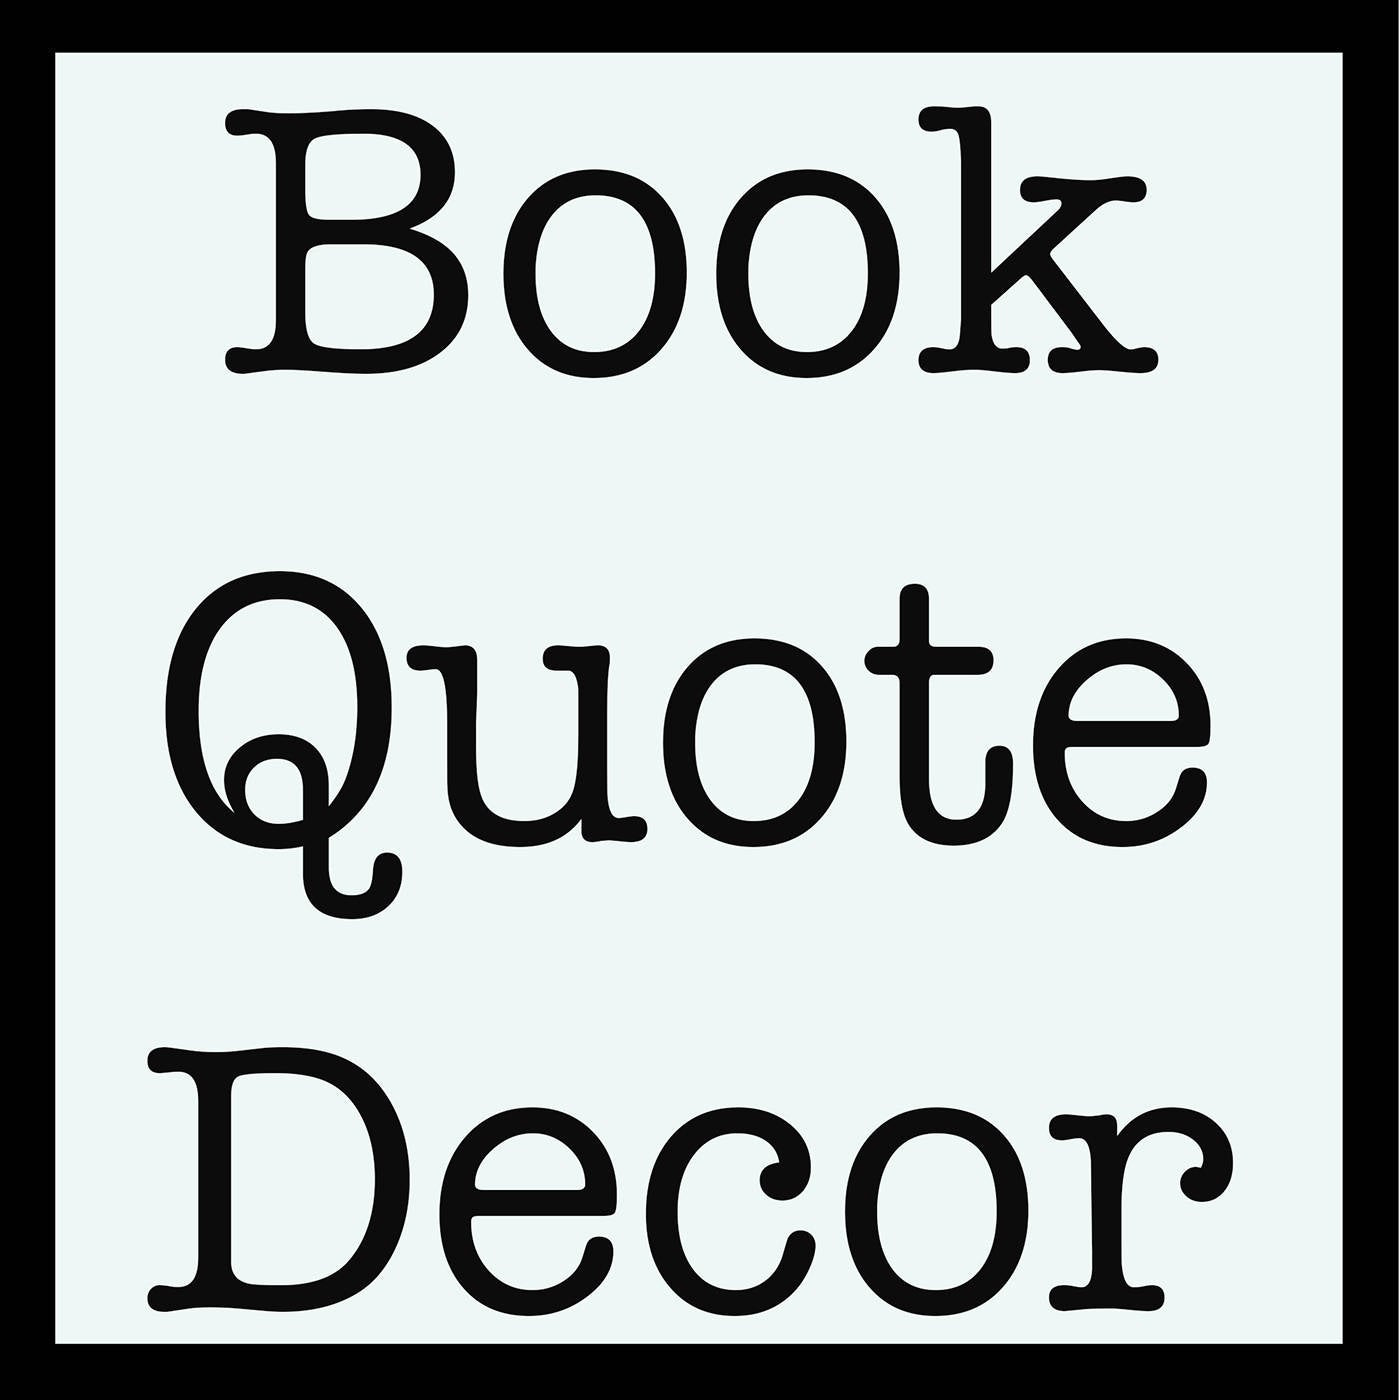 Pablo Picasso Quote Print, Everything you can imagine is real, black and white print, home decor Unframed - BookQuoteDecor